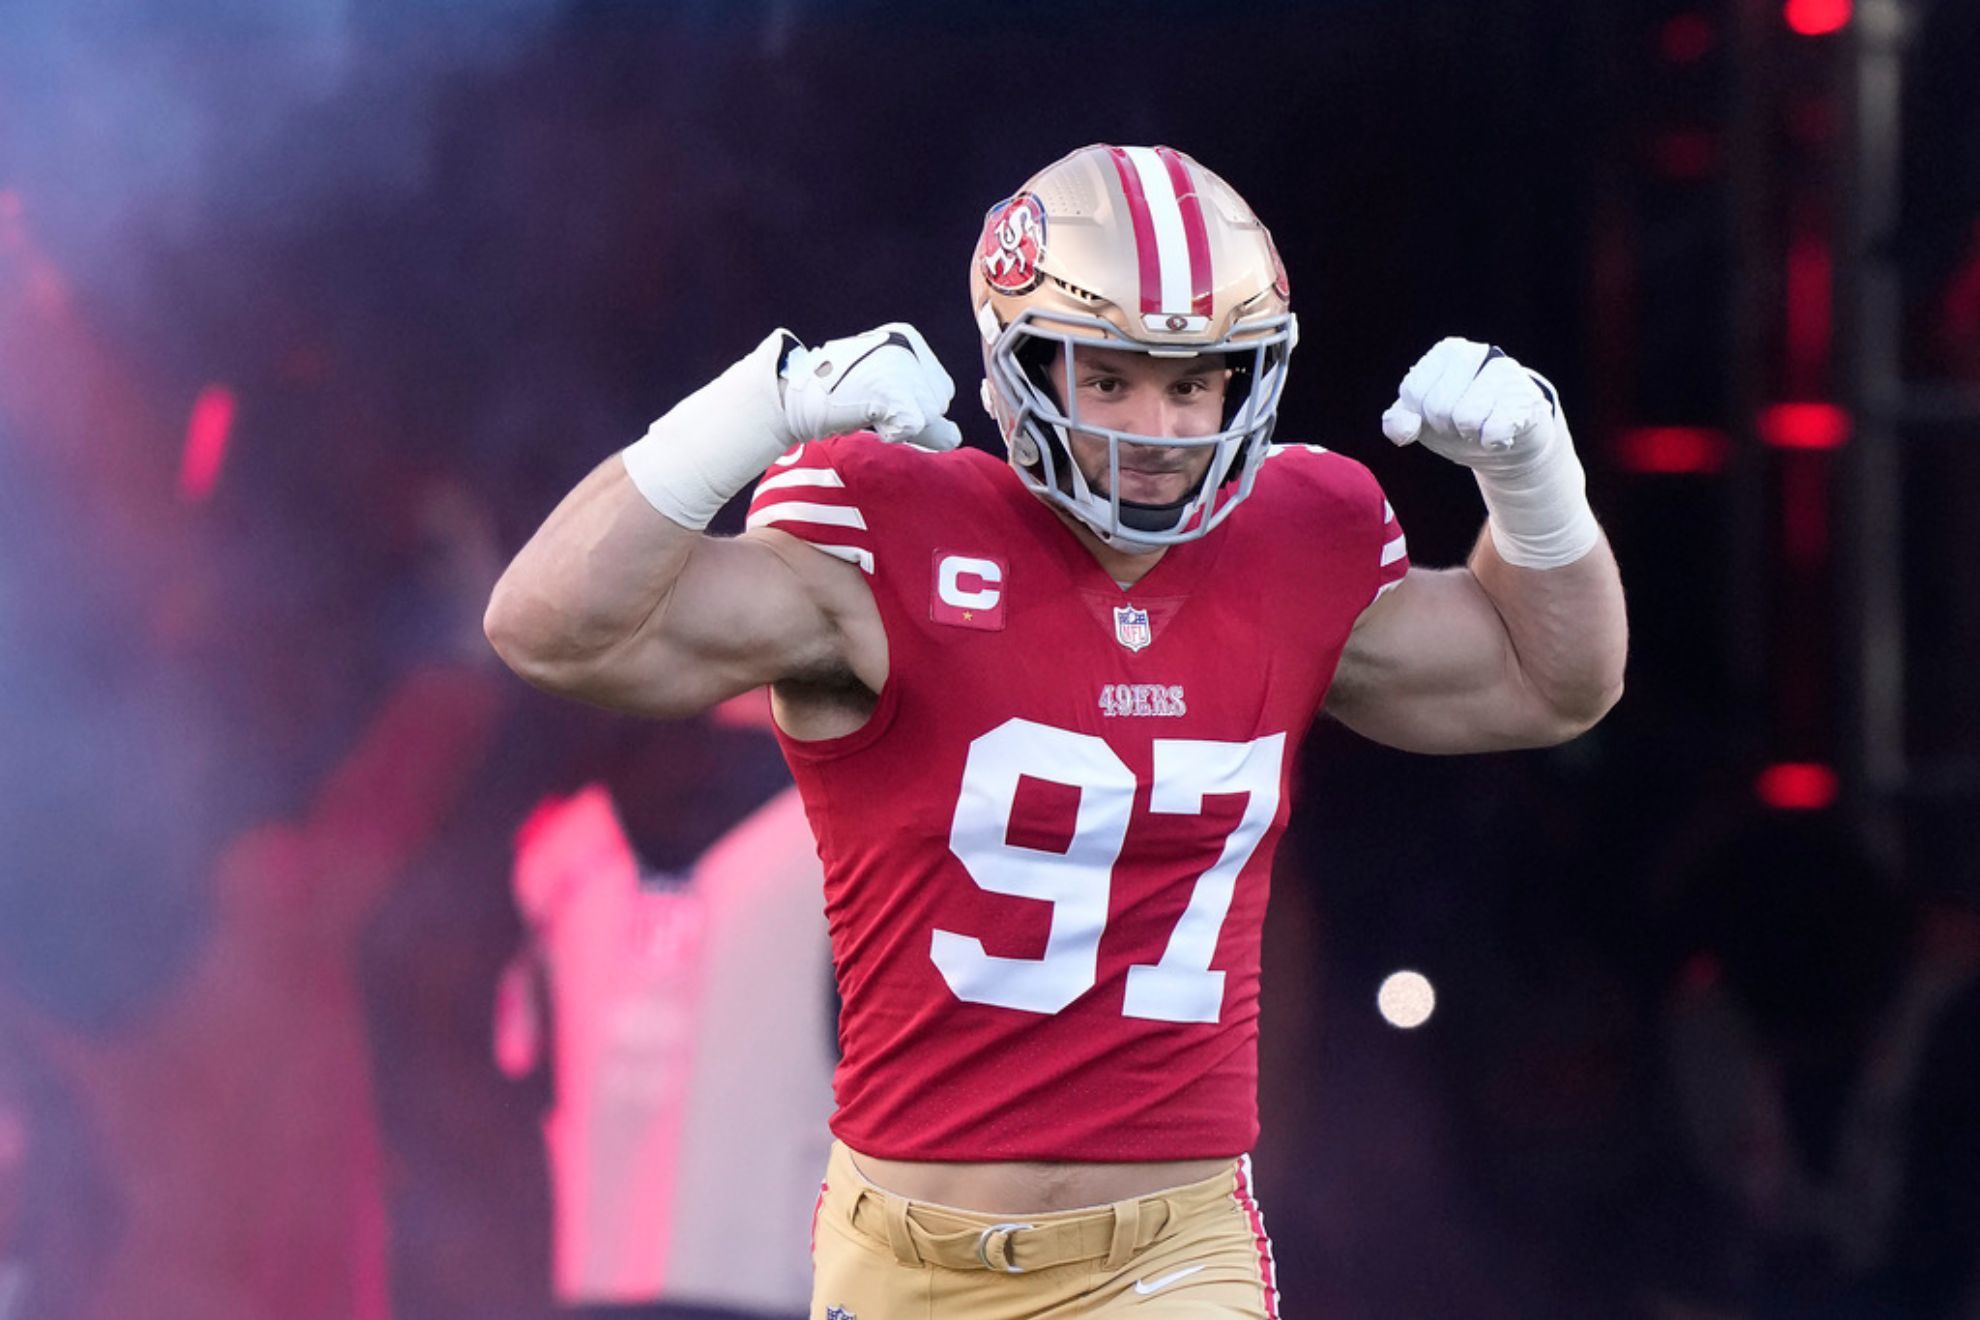 Bosa made an immediate impact on the Niners defense after being drafted second overall in 2019, winning Defensive Rookie of the Year and helping San Francisco reach the Super Bowl.